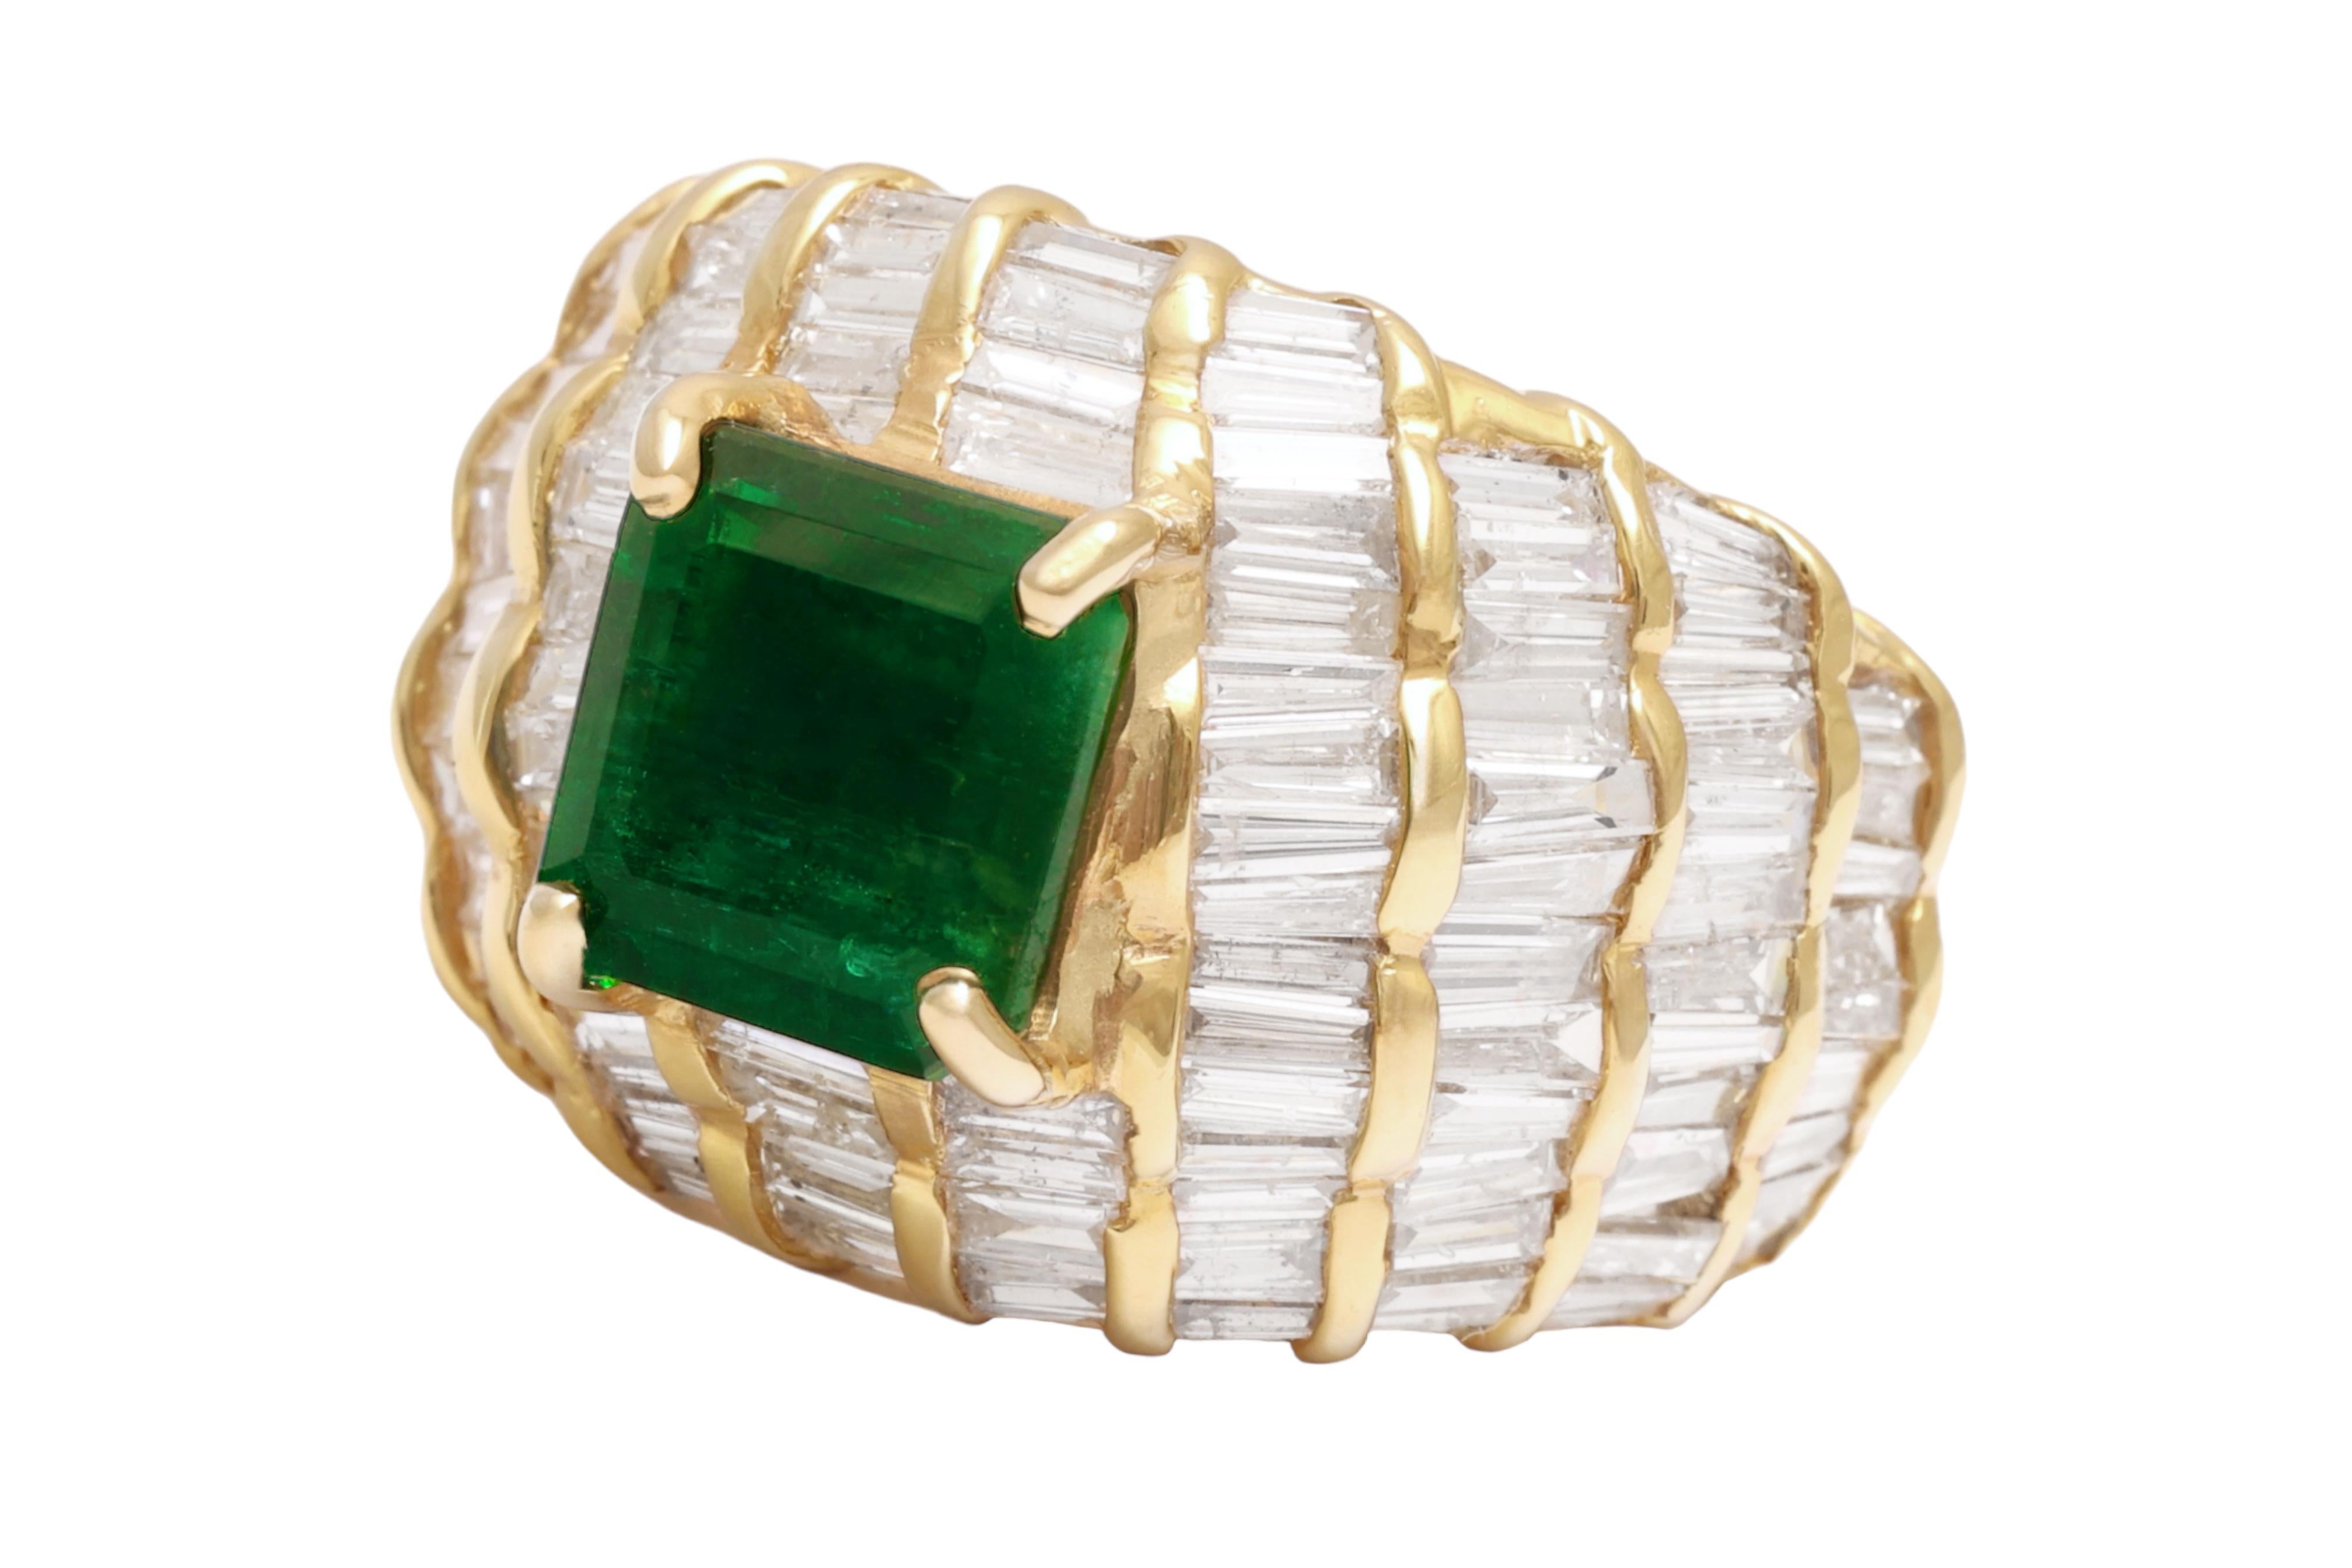 Artisan Carat Gemlab Certified 2.54 Carat Emerald Dome Ring with Baguette Diamonds For Sale